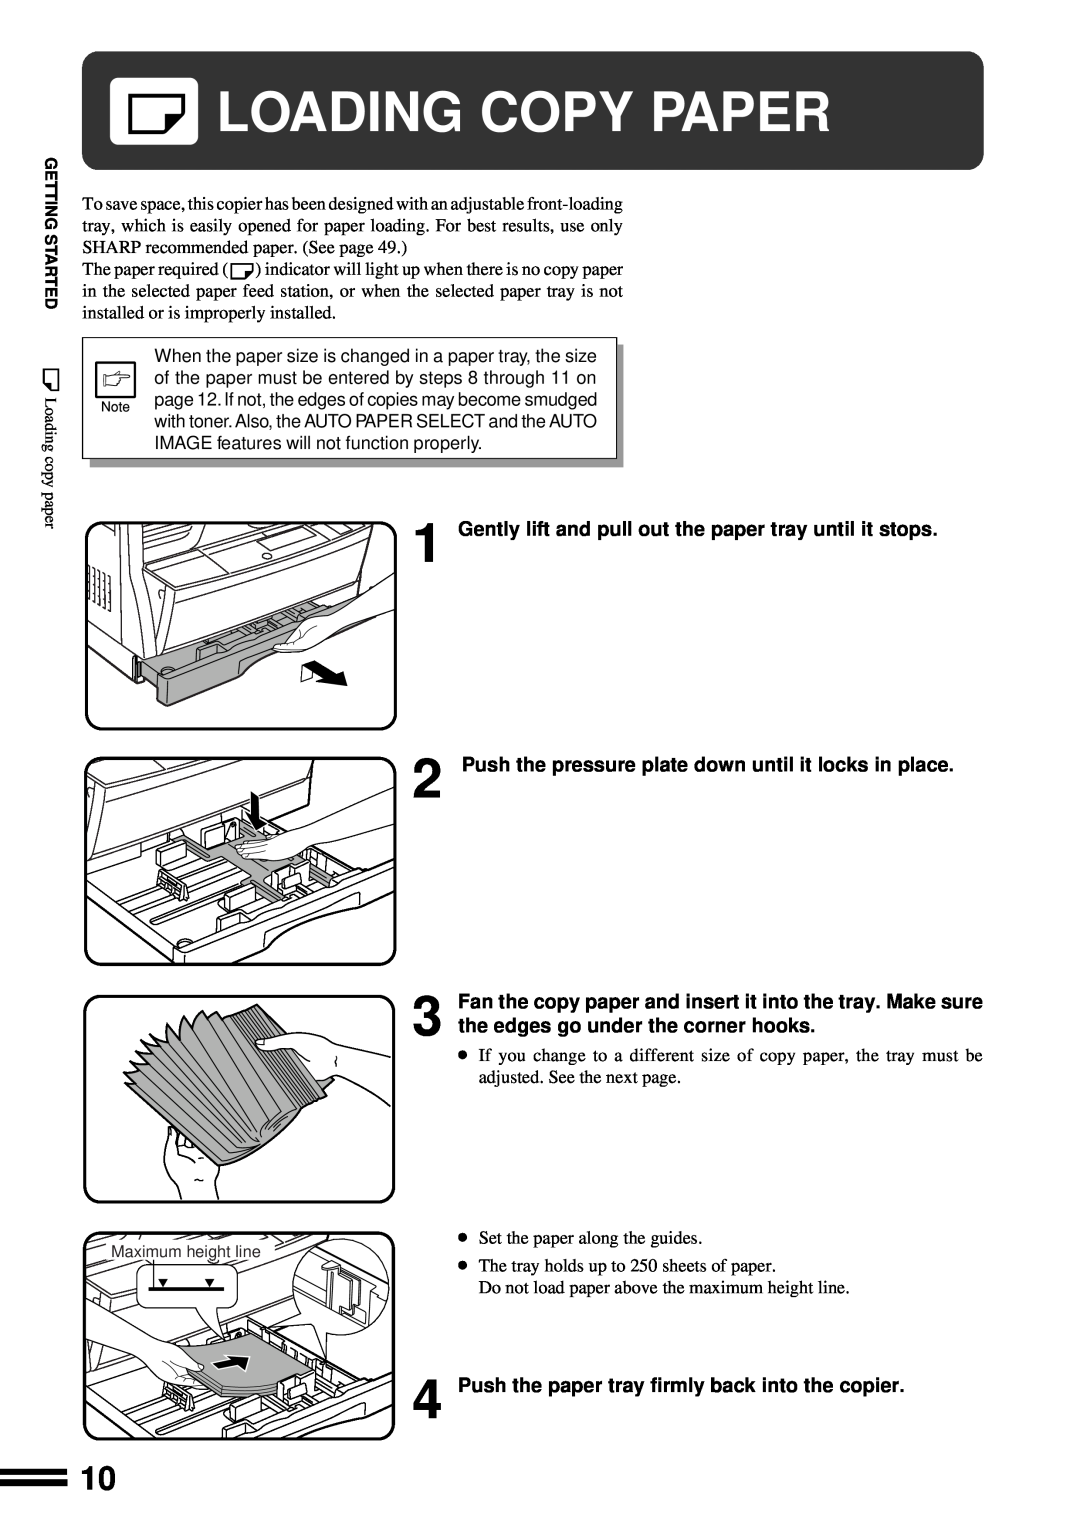 Sharp AR-162, AR-163 operation manual Loading Copy Paper, Gently lift and pull out the paper tray until it stops 